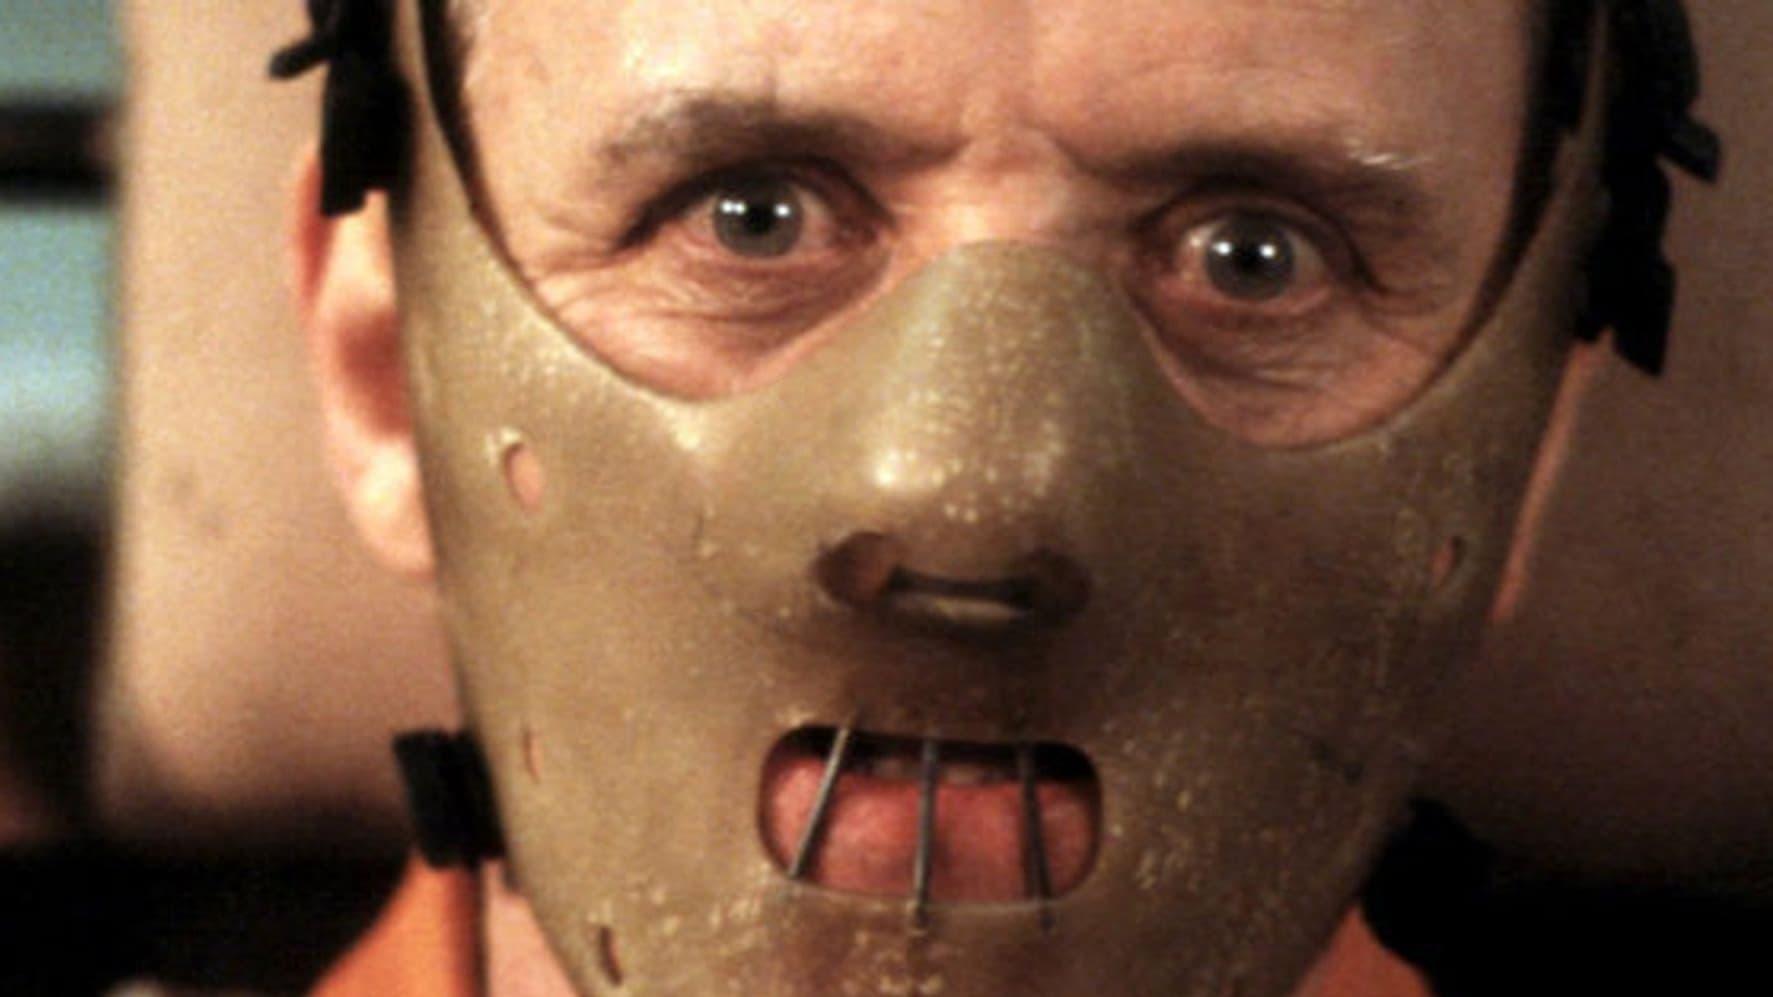 Inside the Labyrinth: The Making of 'The Silence of the Lambs' backdrop